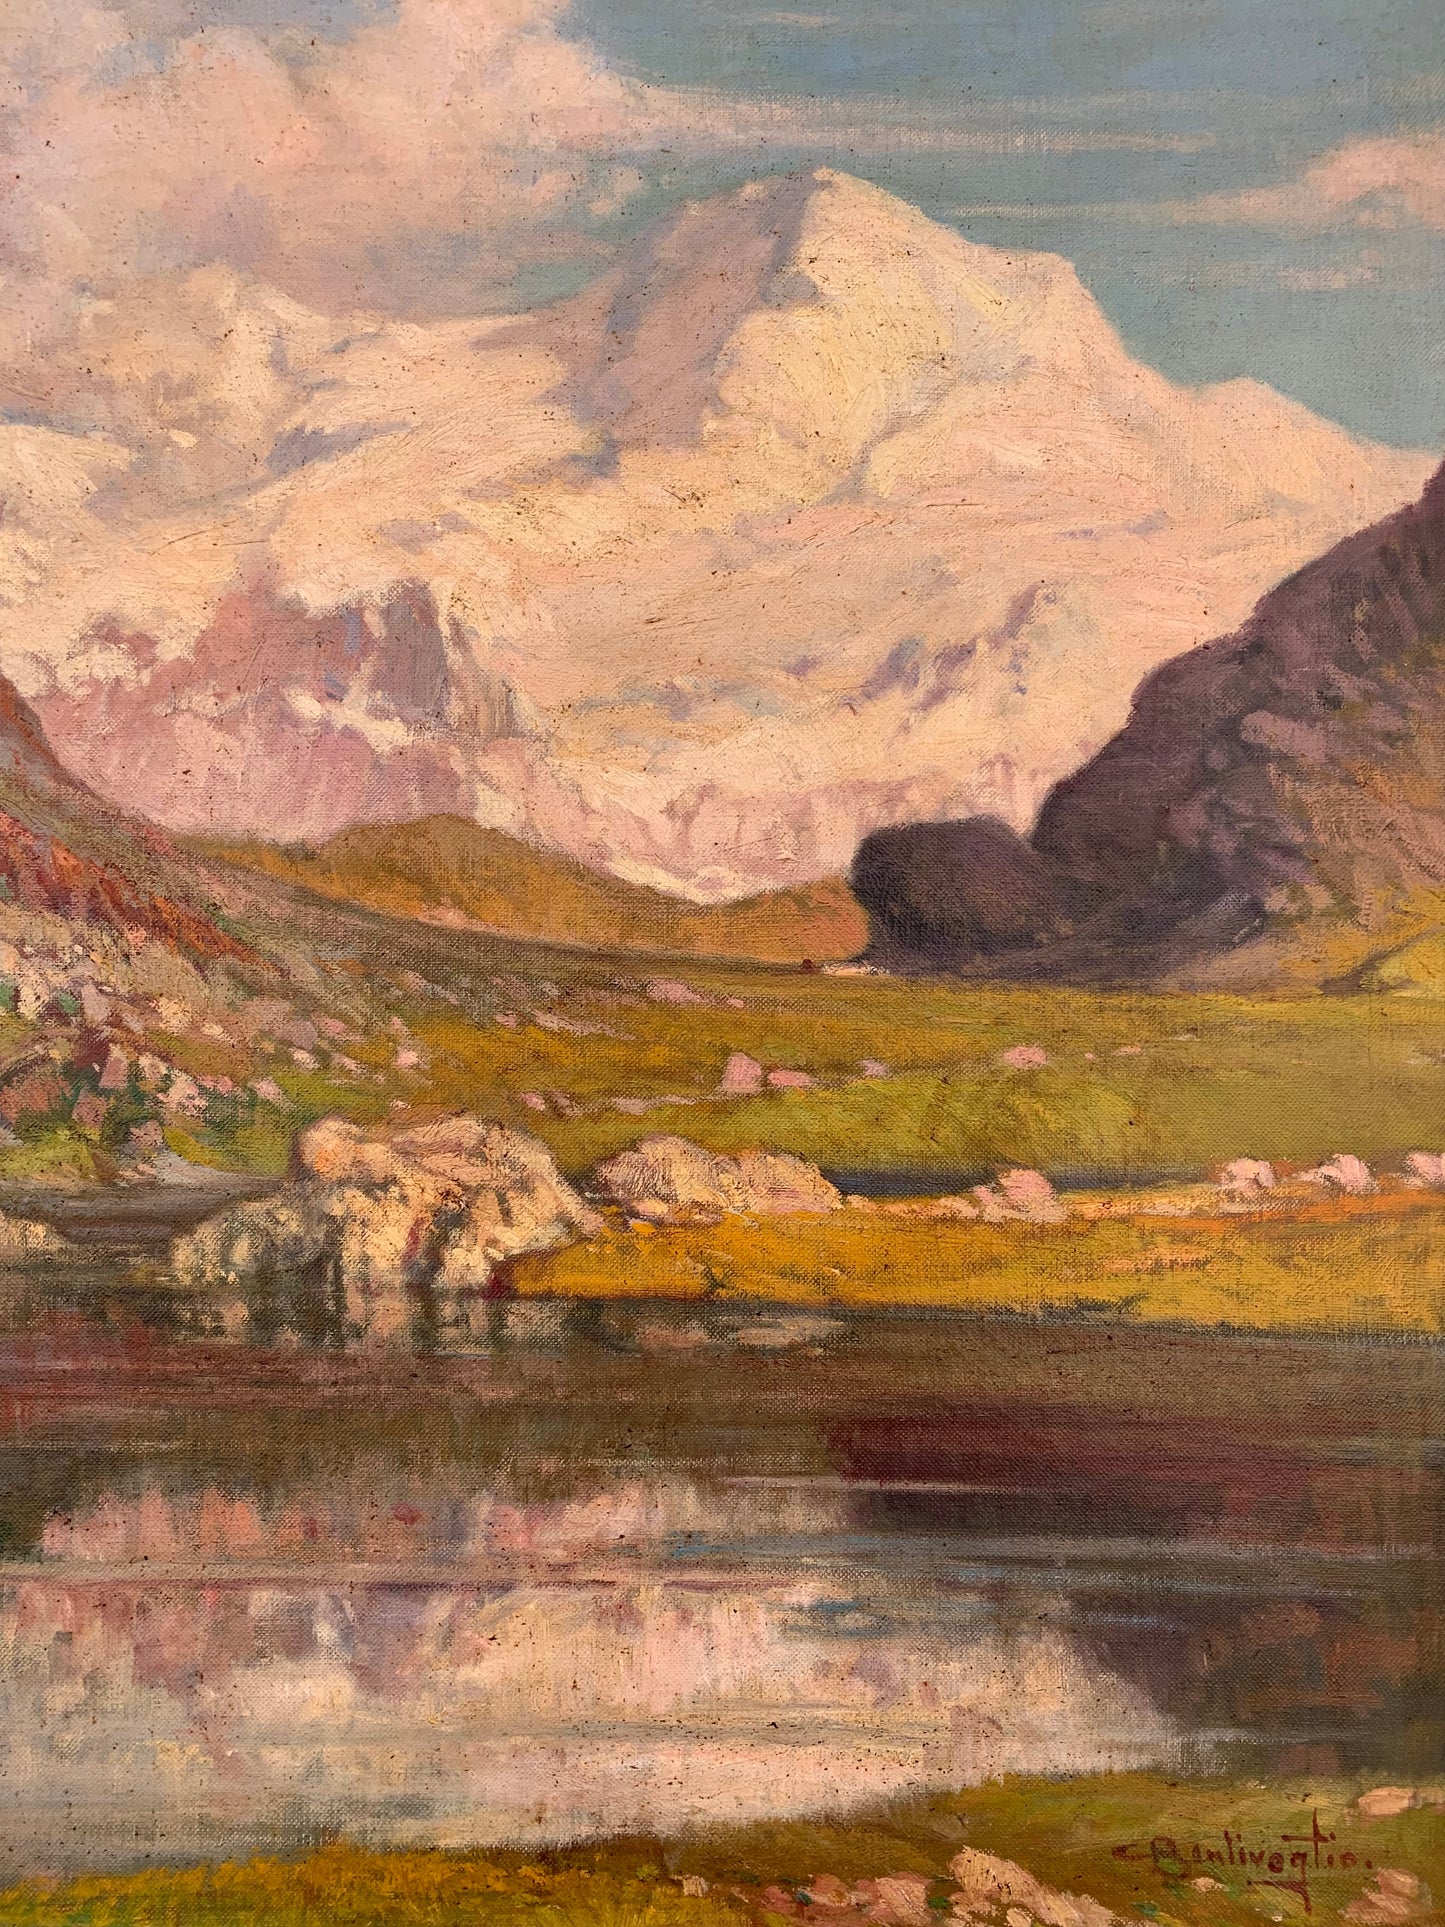 Ligurian Alps landscape with snow-capped peaks tinted by pink light. By Cesare Bentivoglio (Genoa,1868-1952)